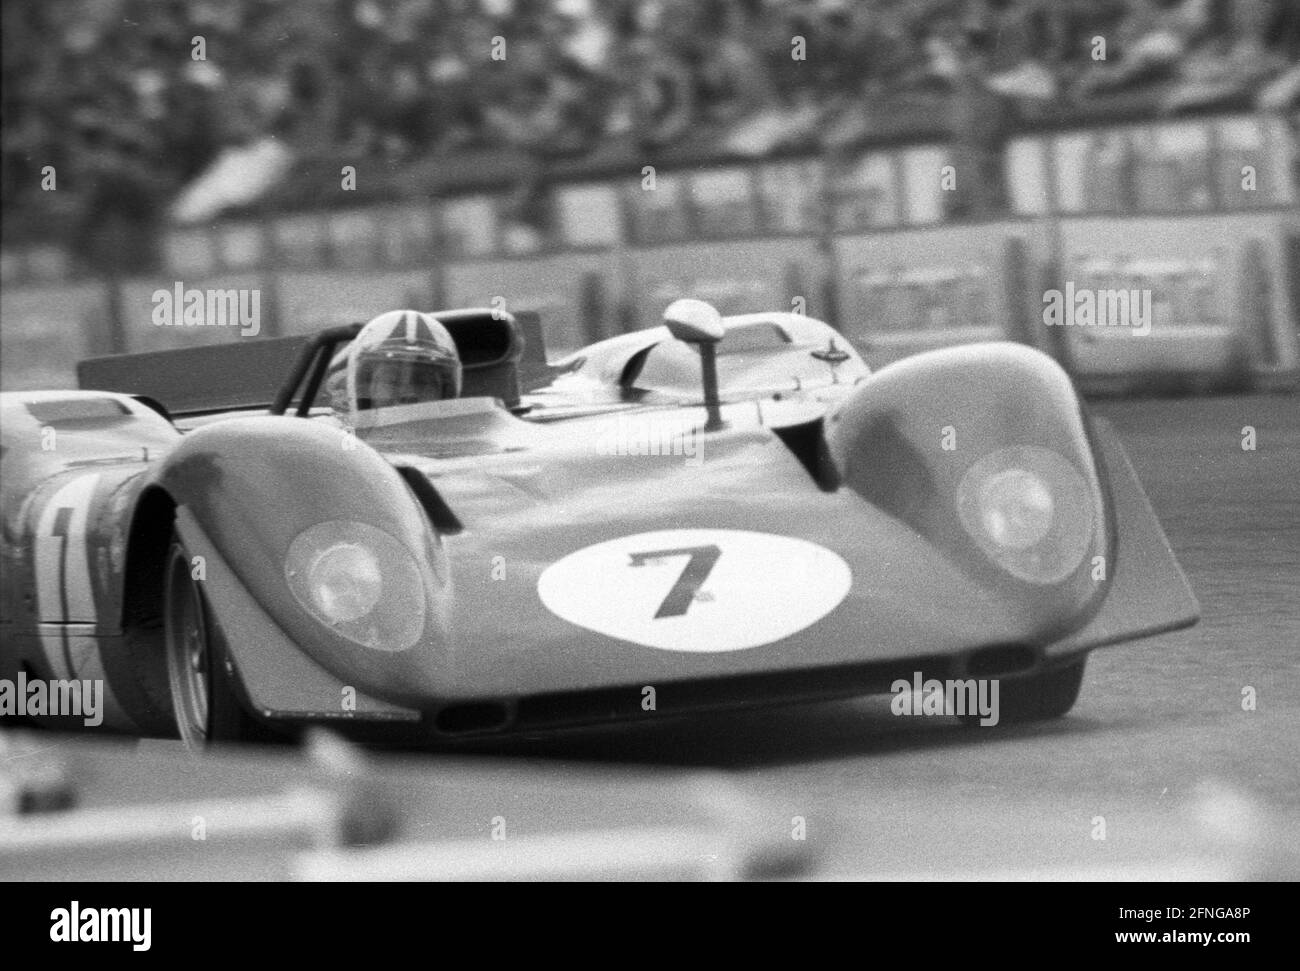 1000 km race at the Nürburgring 01.06.1969. Ferrari 312P of Pedro Rodriguez and Chris Amon in action [automated translation] Stock Photo